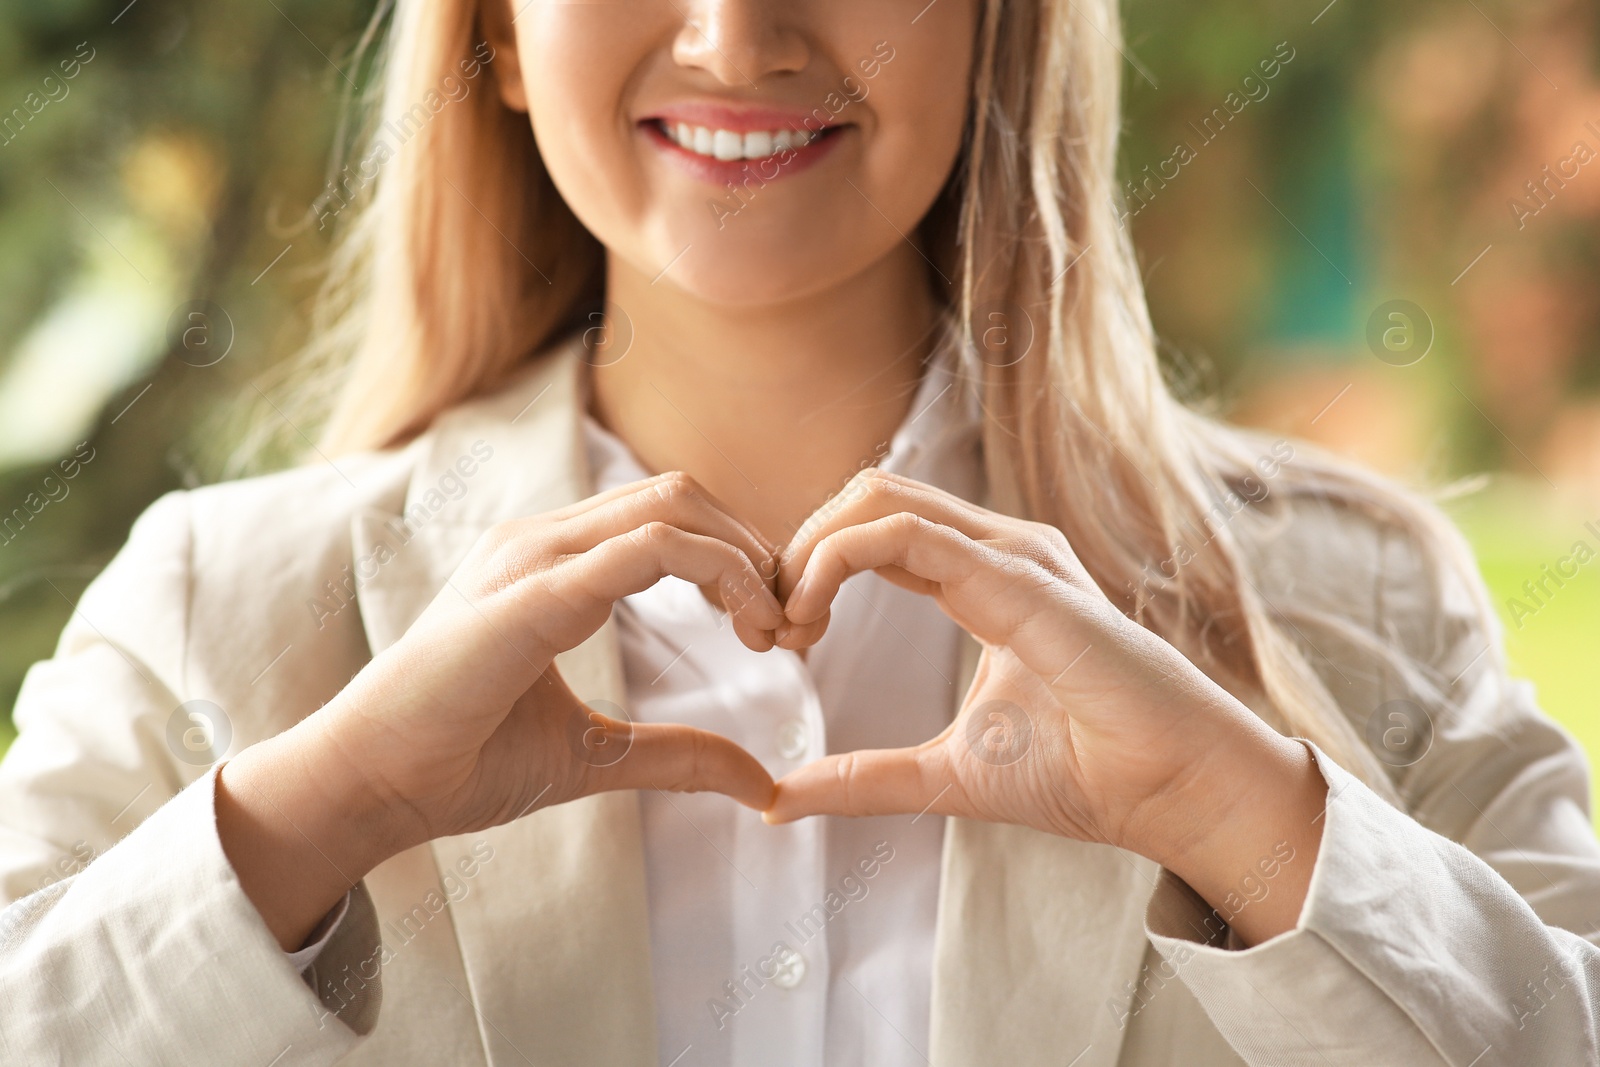 Photo of Woman showing heart gesture with hands against blurred background, closeup. Love concept